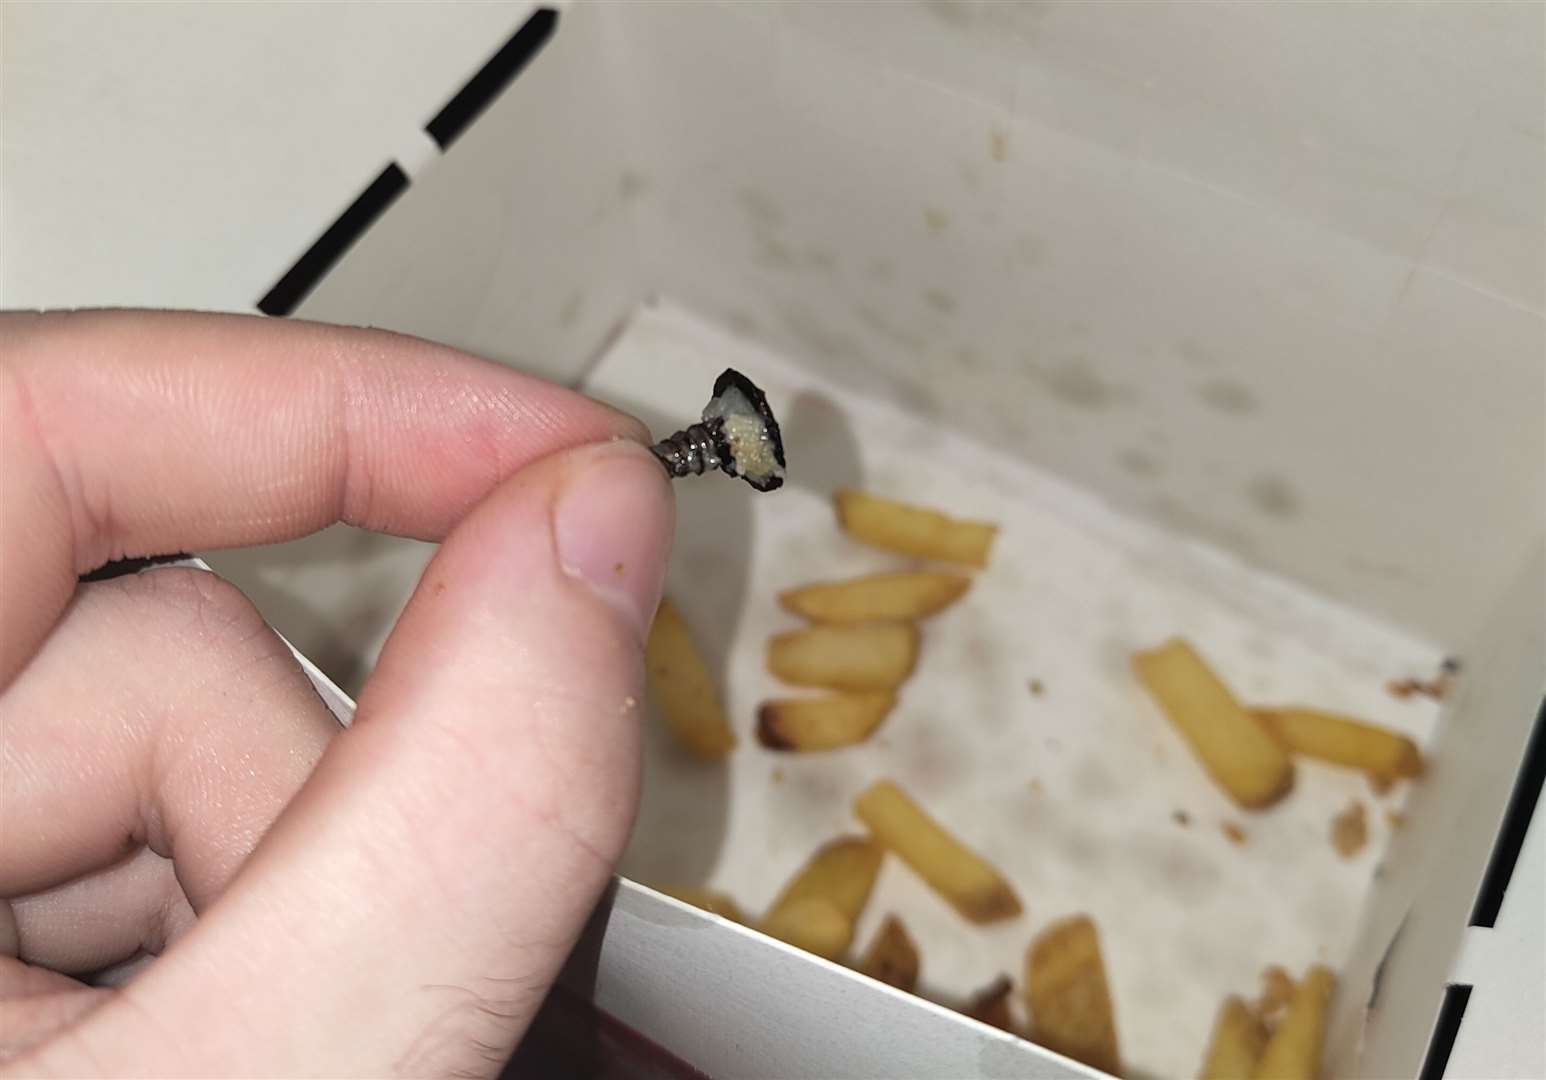 The fried screw found in a Gillingham KFC meal